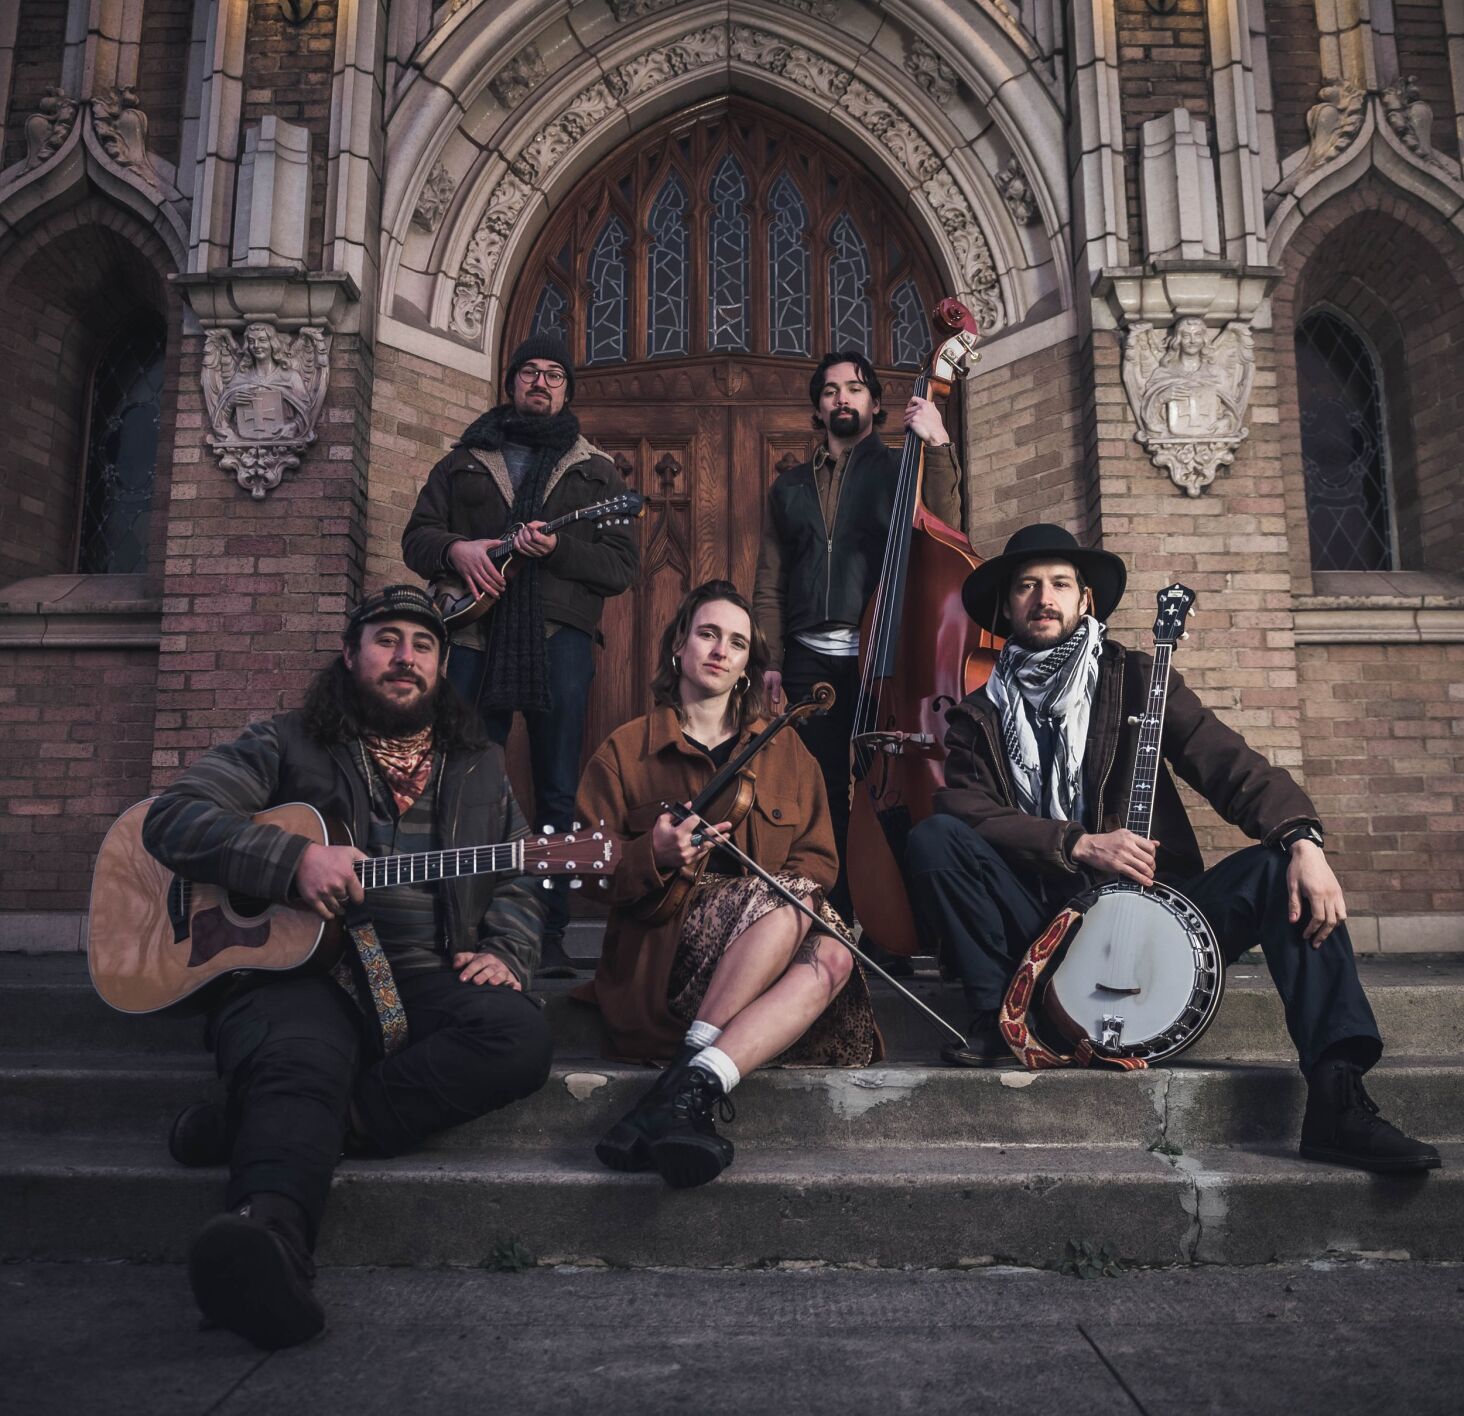 String band Muddy Souls plays bluegrass in Redmond | lifestyle